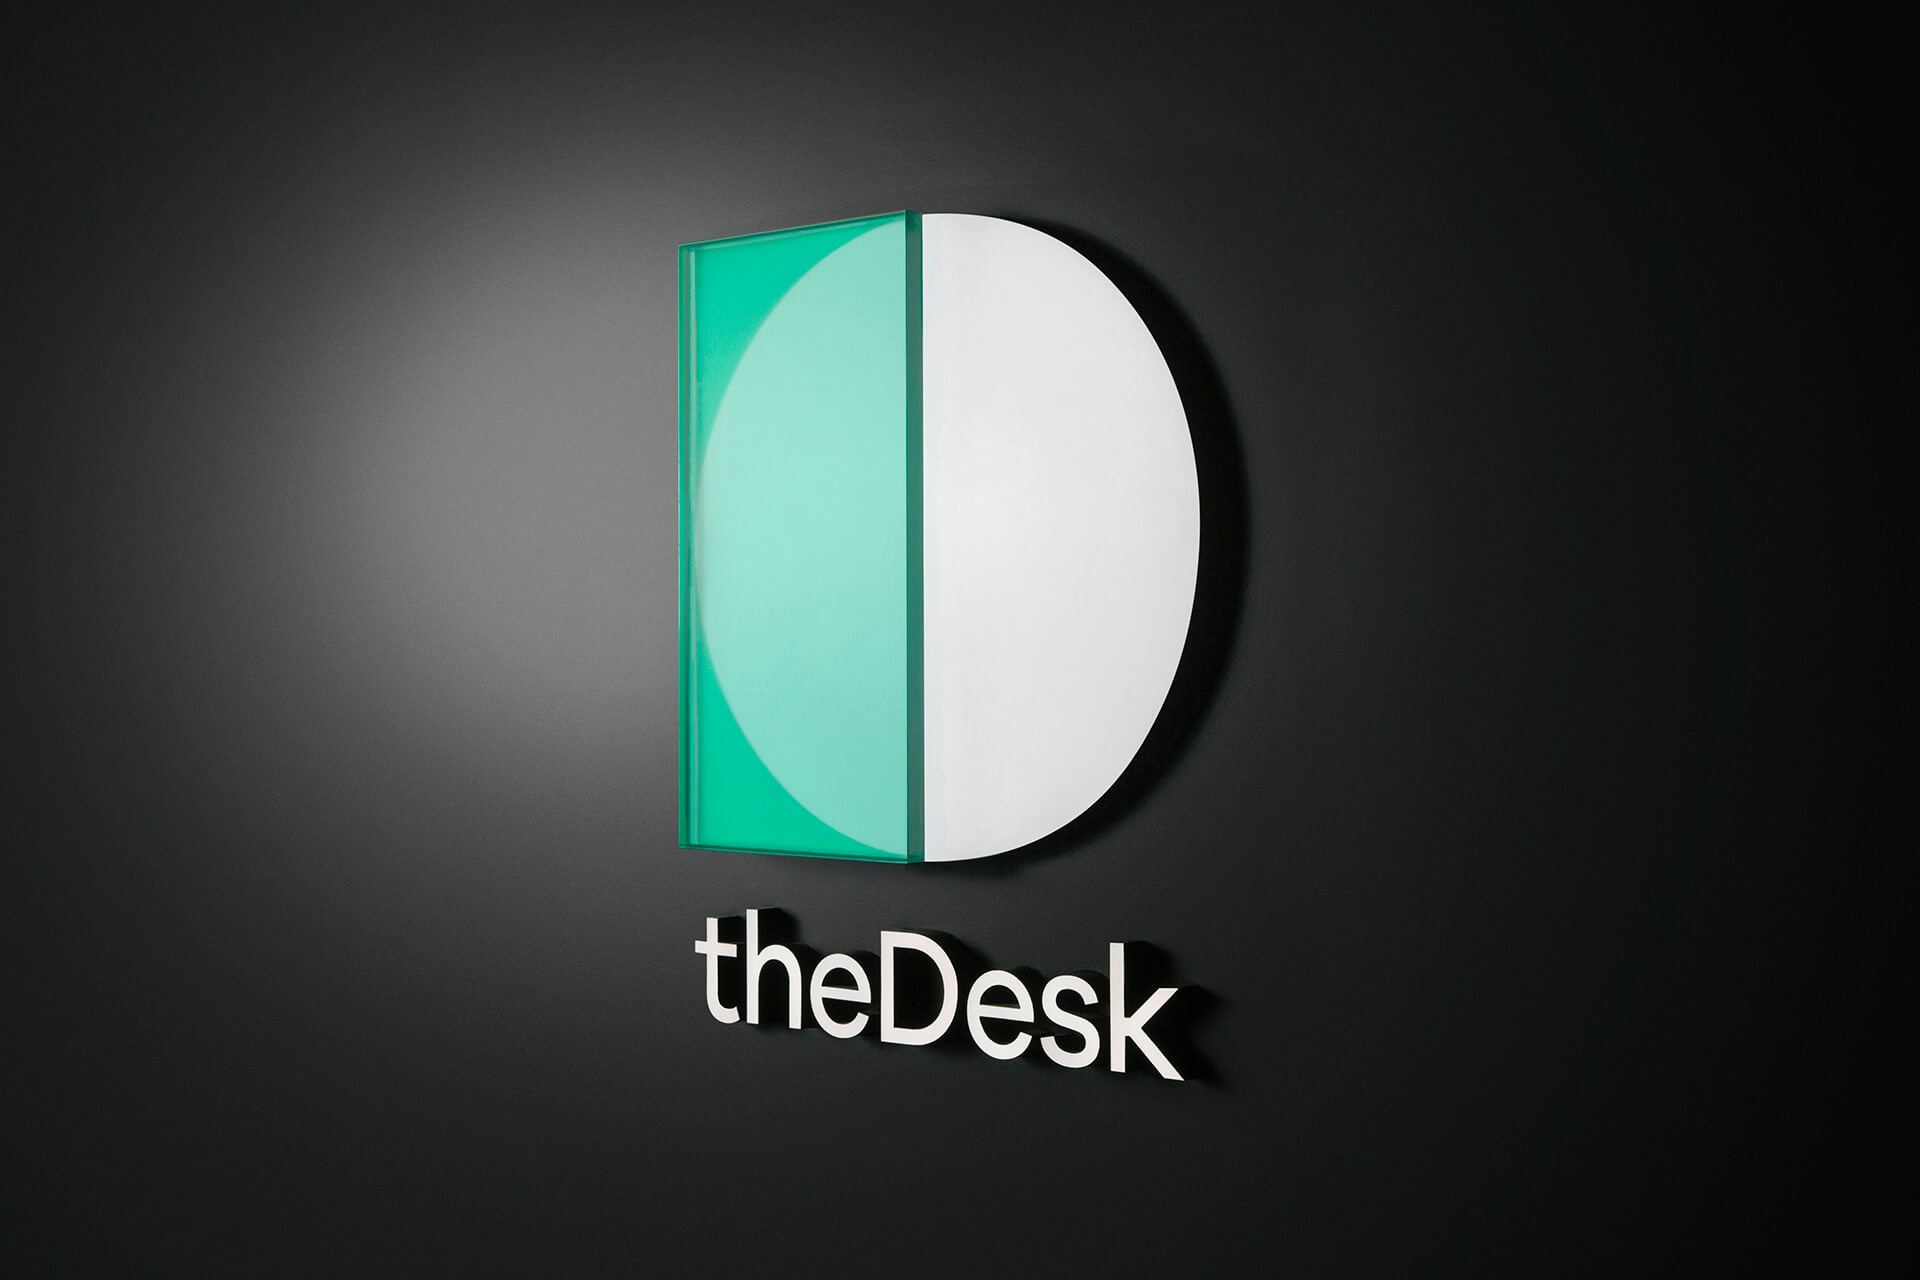 Branding & Art Direction for theDesk co-working space